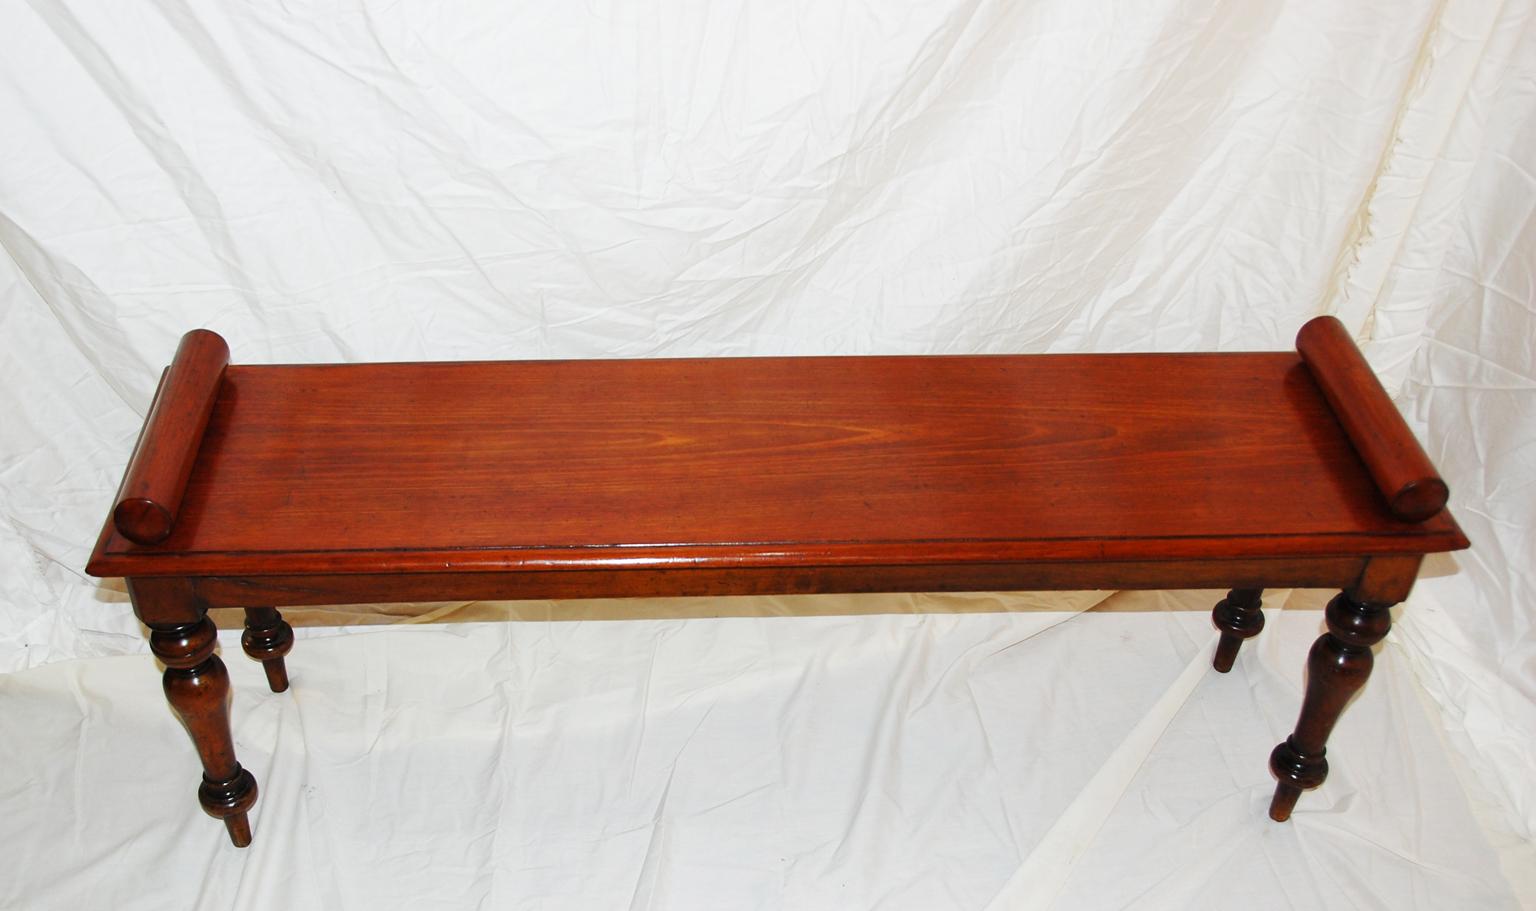 Victorian English 19th Century Walnut Hall Bench with Turned Legs, Four Feet Long For Sale